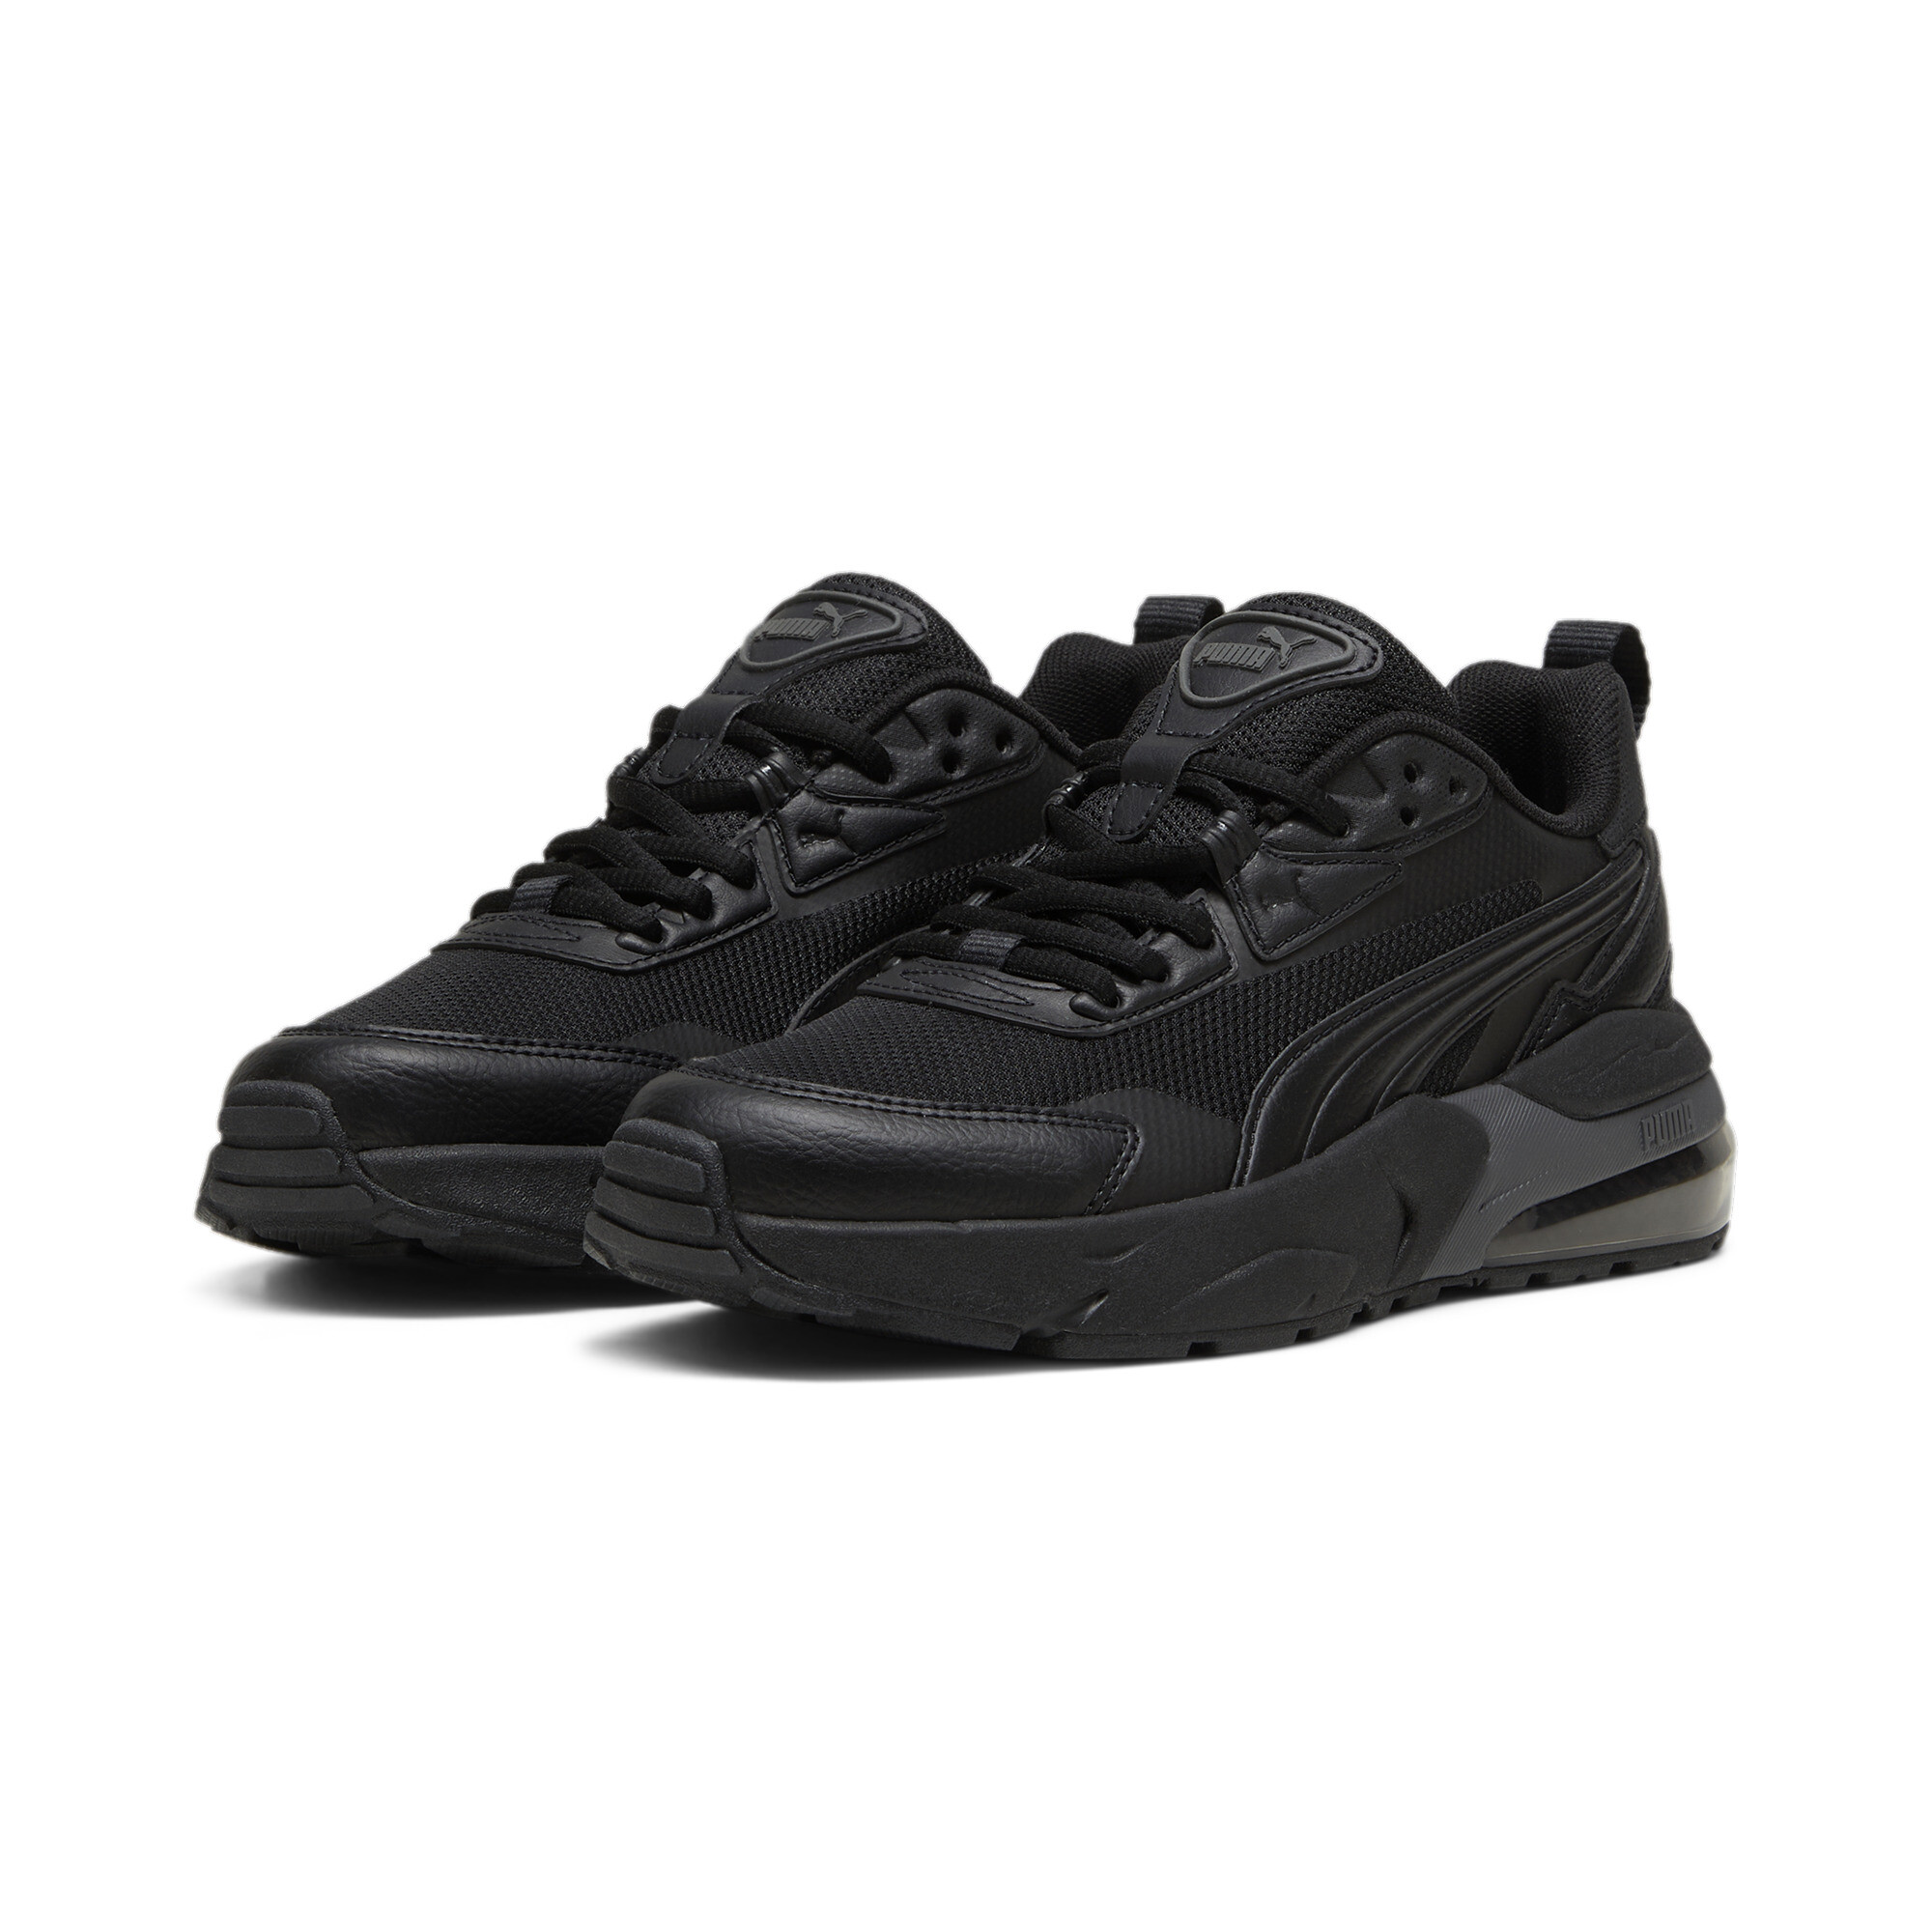 Puma Vis2k Youth Sneakers, Black, Size 39, Shoes